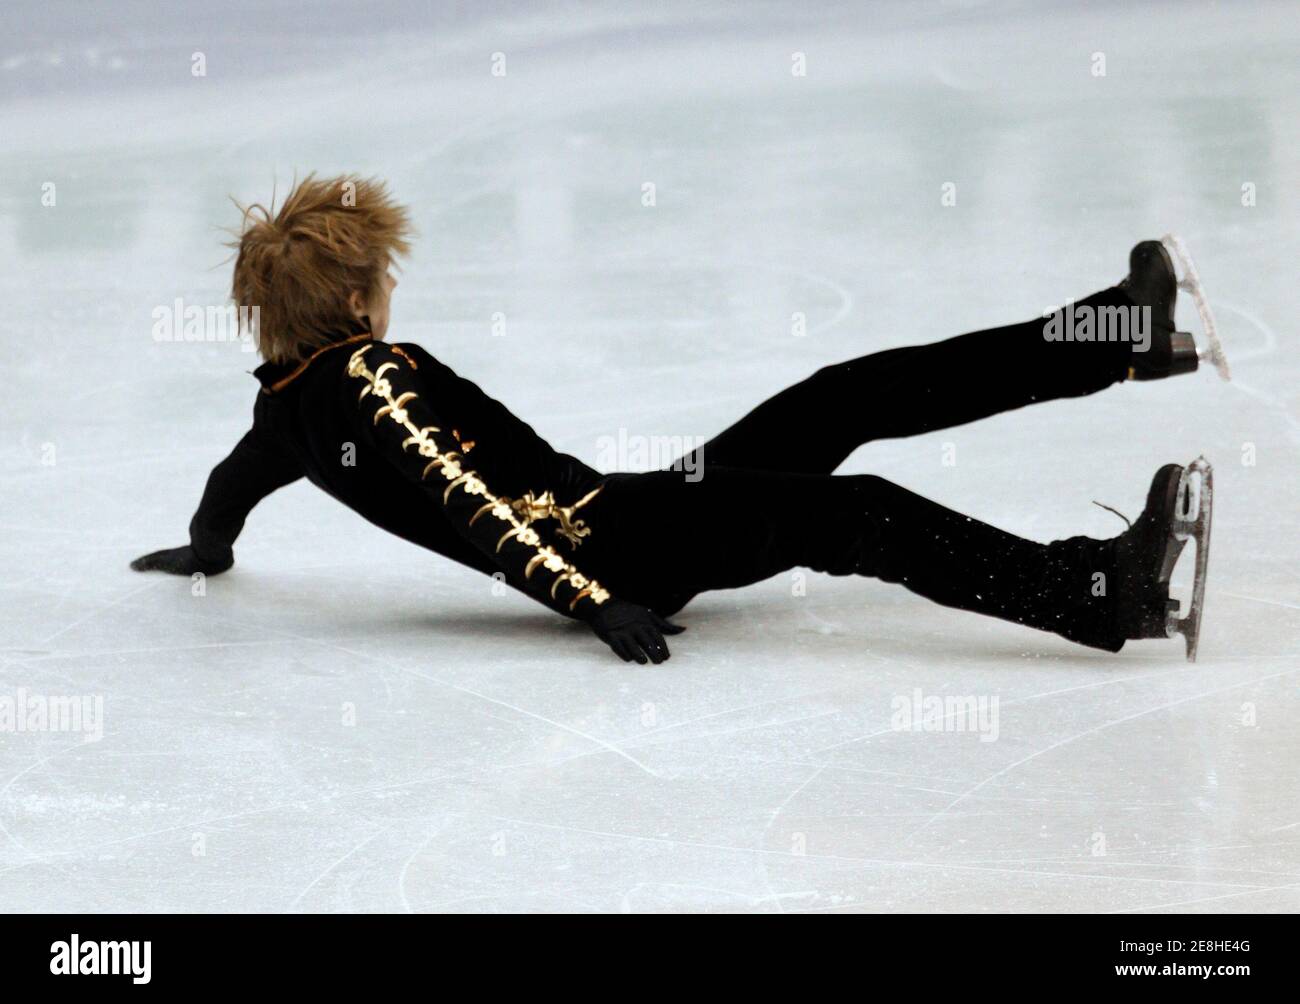 Kevin Reynolds of Canada falls during the men's free skating competition at the ISU Four Continents Figure Skating Championships in Jeonju, about 240 km (149 miles) south of Seoul, January 30, 2010. Reynolds took first place in the short program category, eighth place in the free skating category and was third overall.  REUTERS/Jo Yong-Hak (SOUTH KOREA - Tags: SPORT FIGURE SKATING) Stock Photo